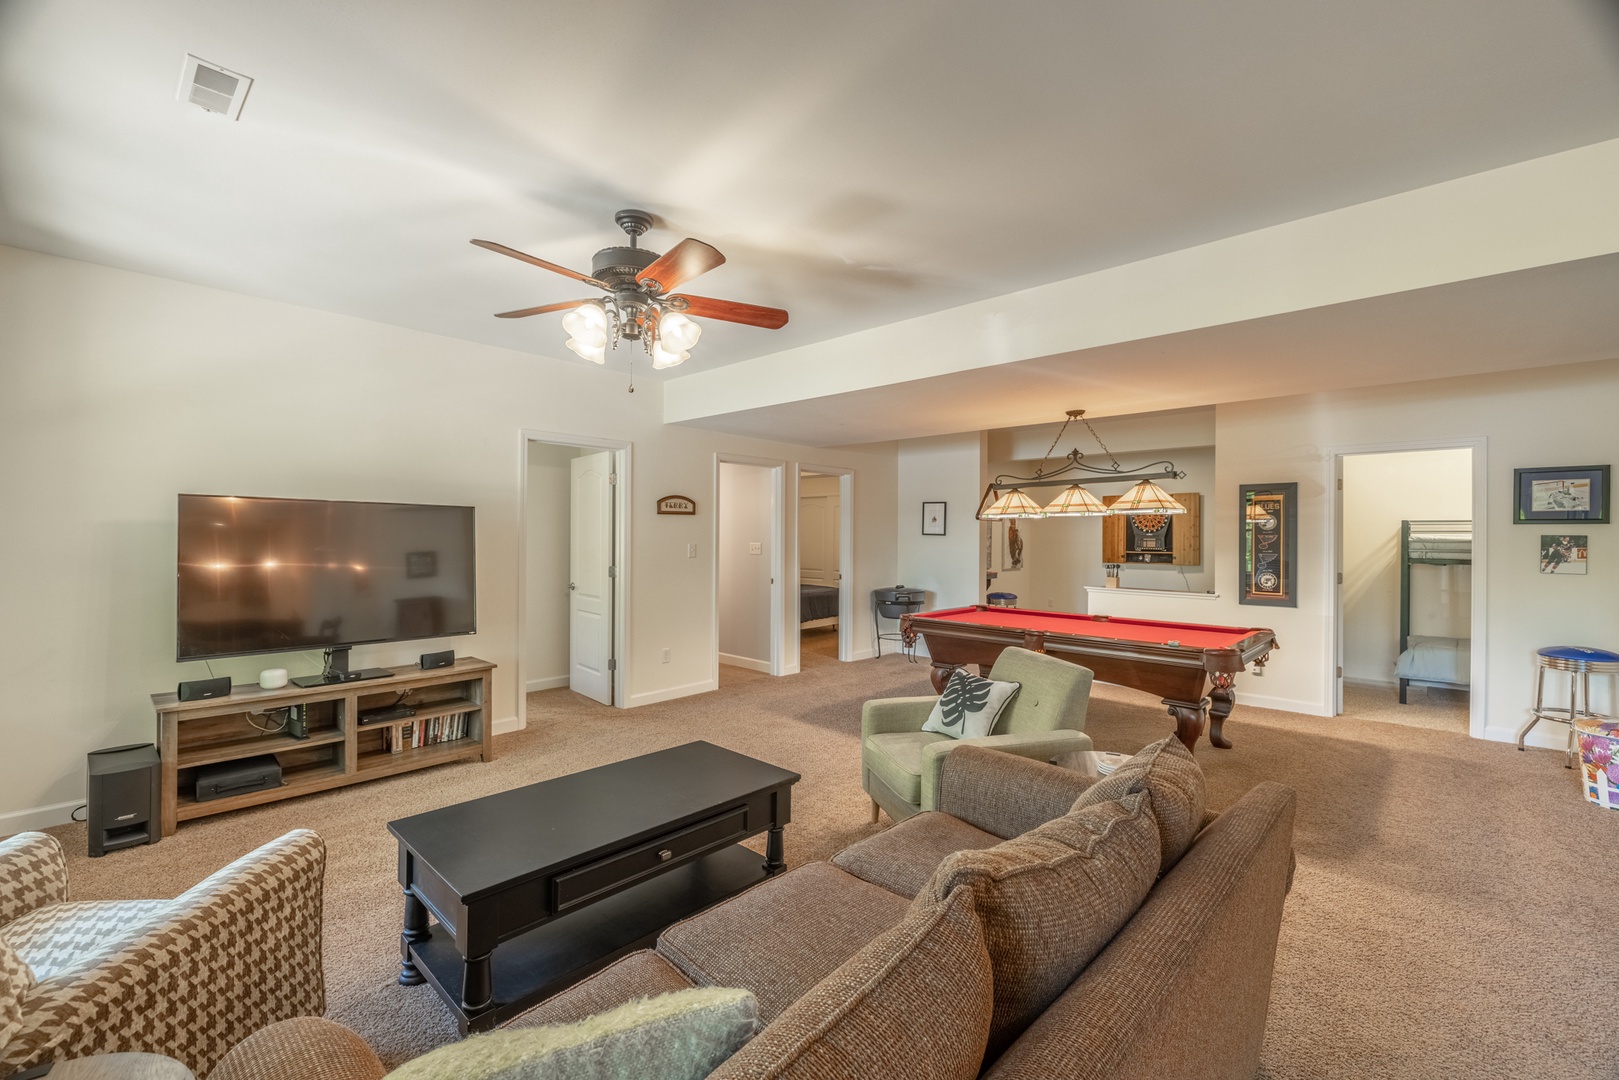 An entertainers dream! Play pool, watch TV, or hangout by the bar in the finished lower level